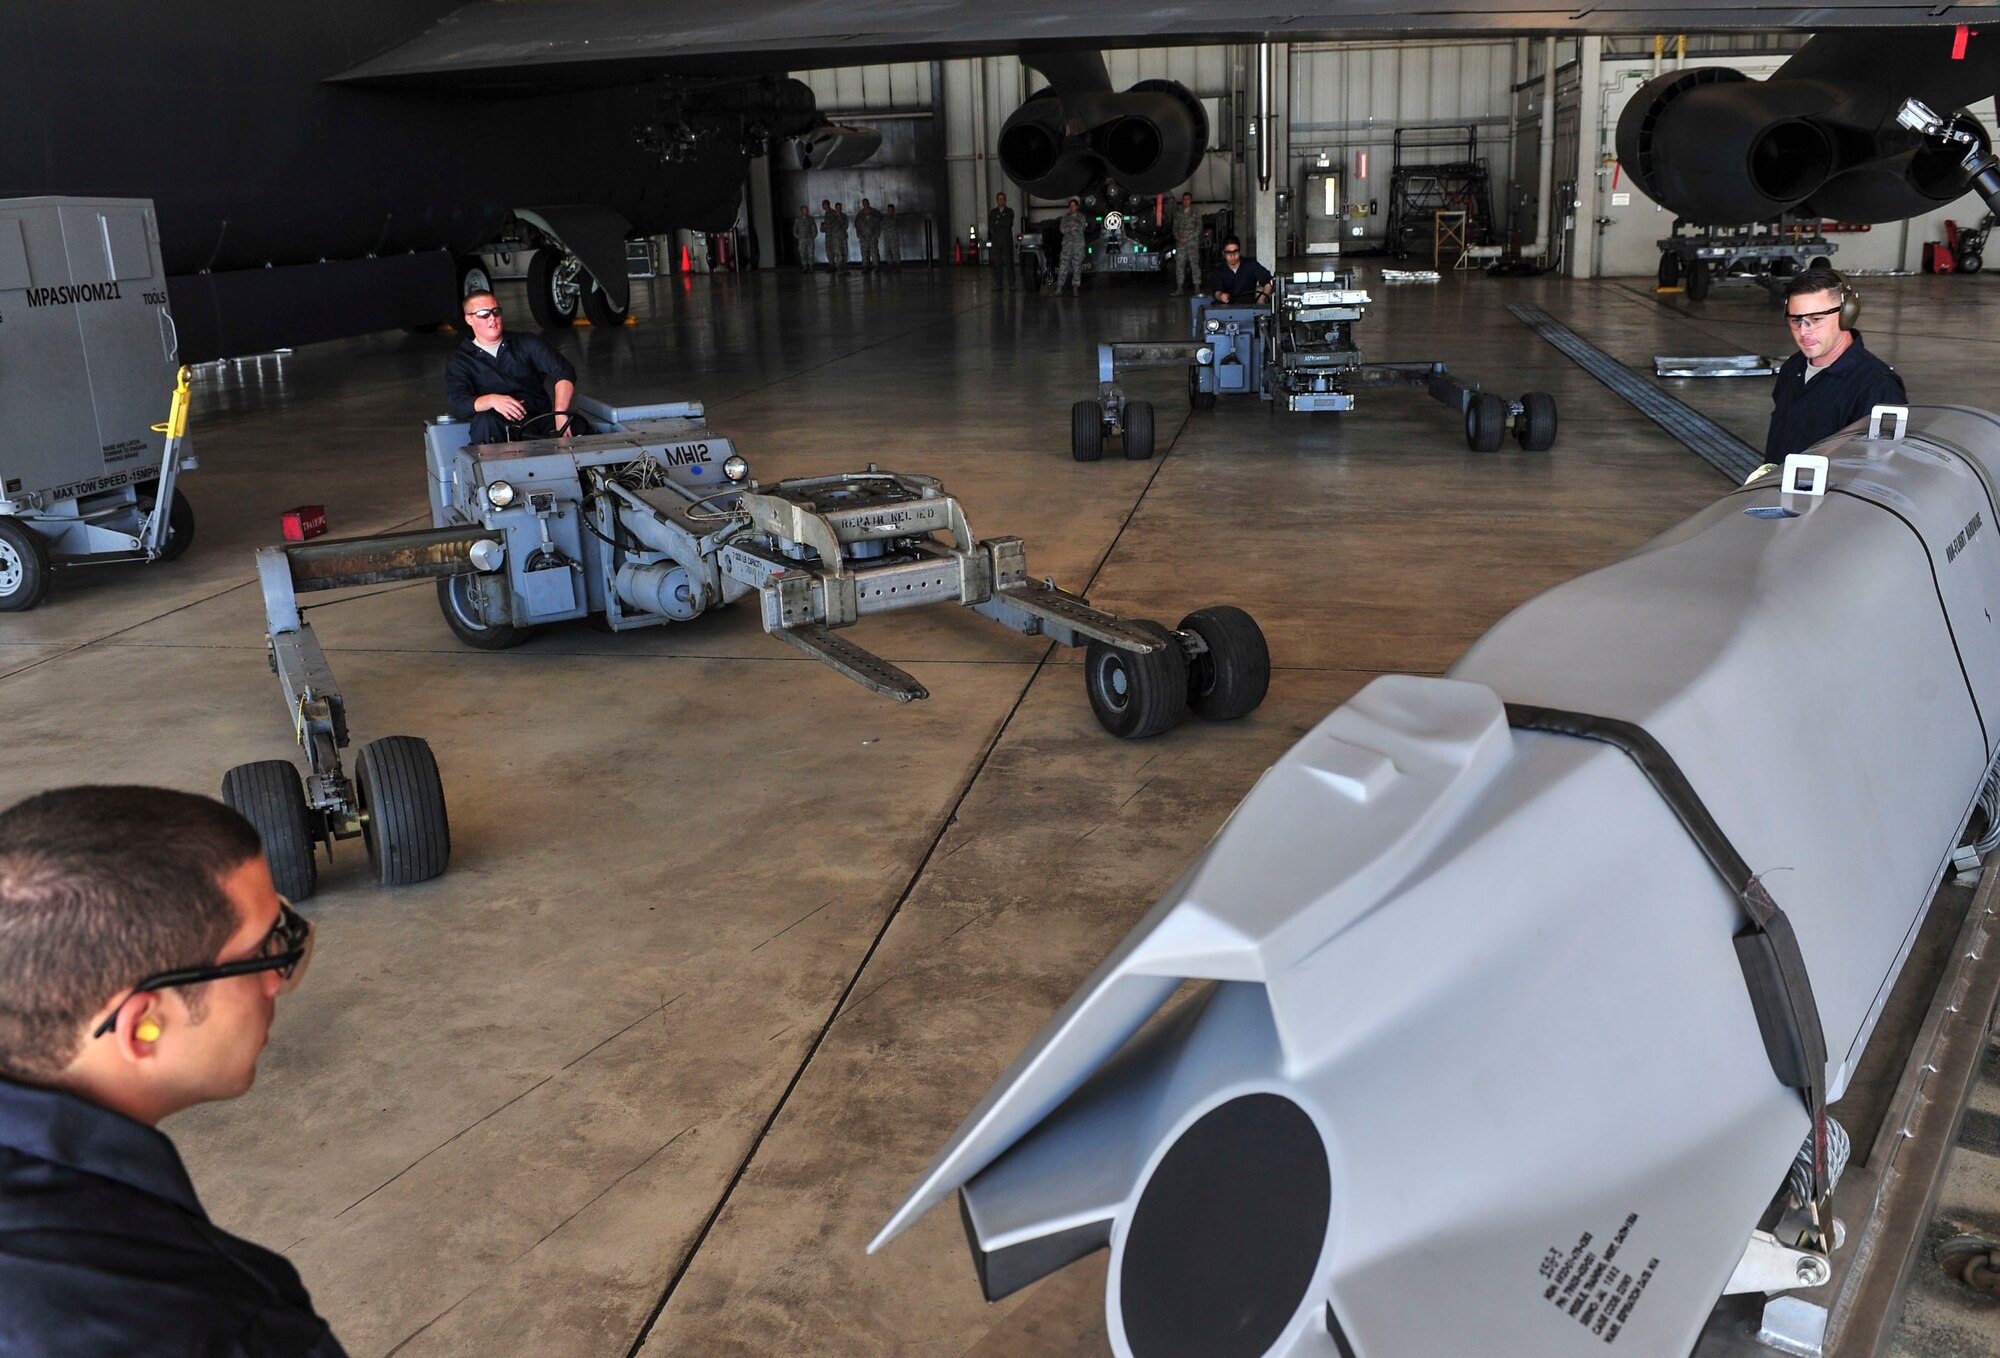 Members of the 5th Aircraft Maintenance Squadron maneuver a “jammer” to transport weapon systems to the wing of a B-52H Stratofortress at Minot Air Force Base, N.D., Aug. 24, 2015. The group was required to load four weapons onto the aircraft as part of Air Force Global Strike Command’s Global Strike Challenge Competition -- a task they completed in approximately 60 minutes. (U.S. Air Force photo/Senior Airman Stephanie Morris)